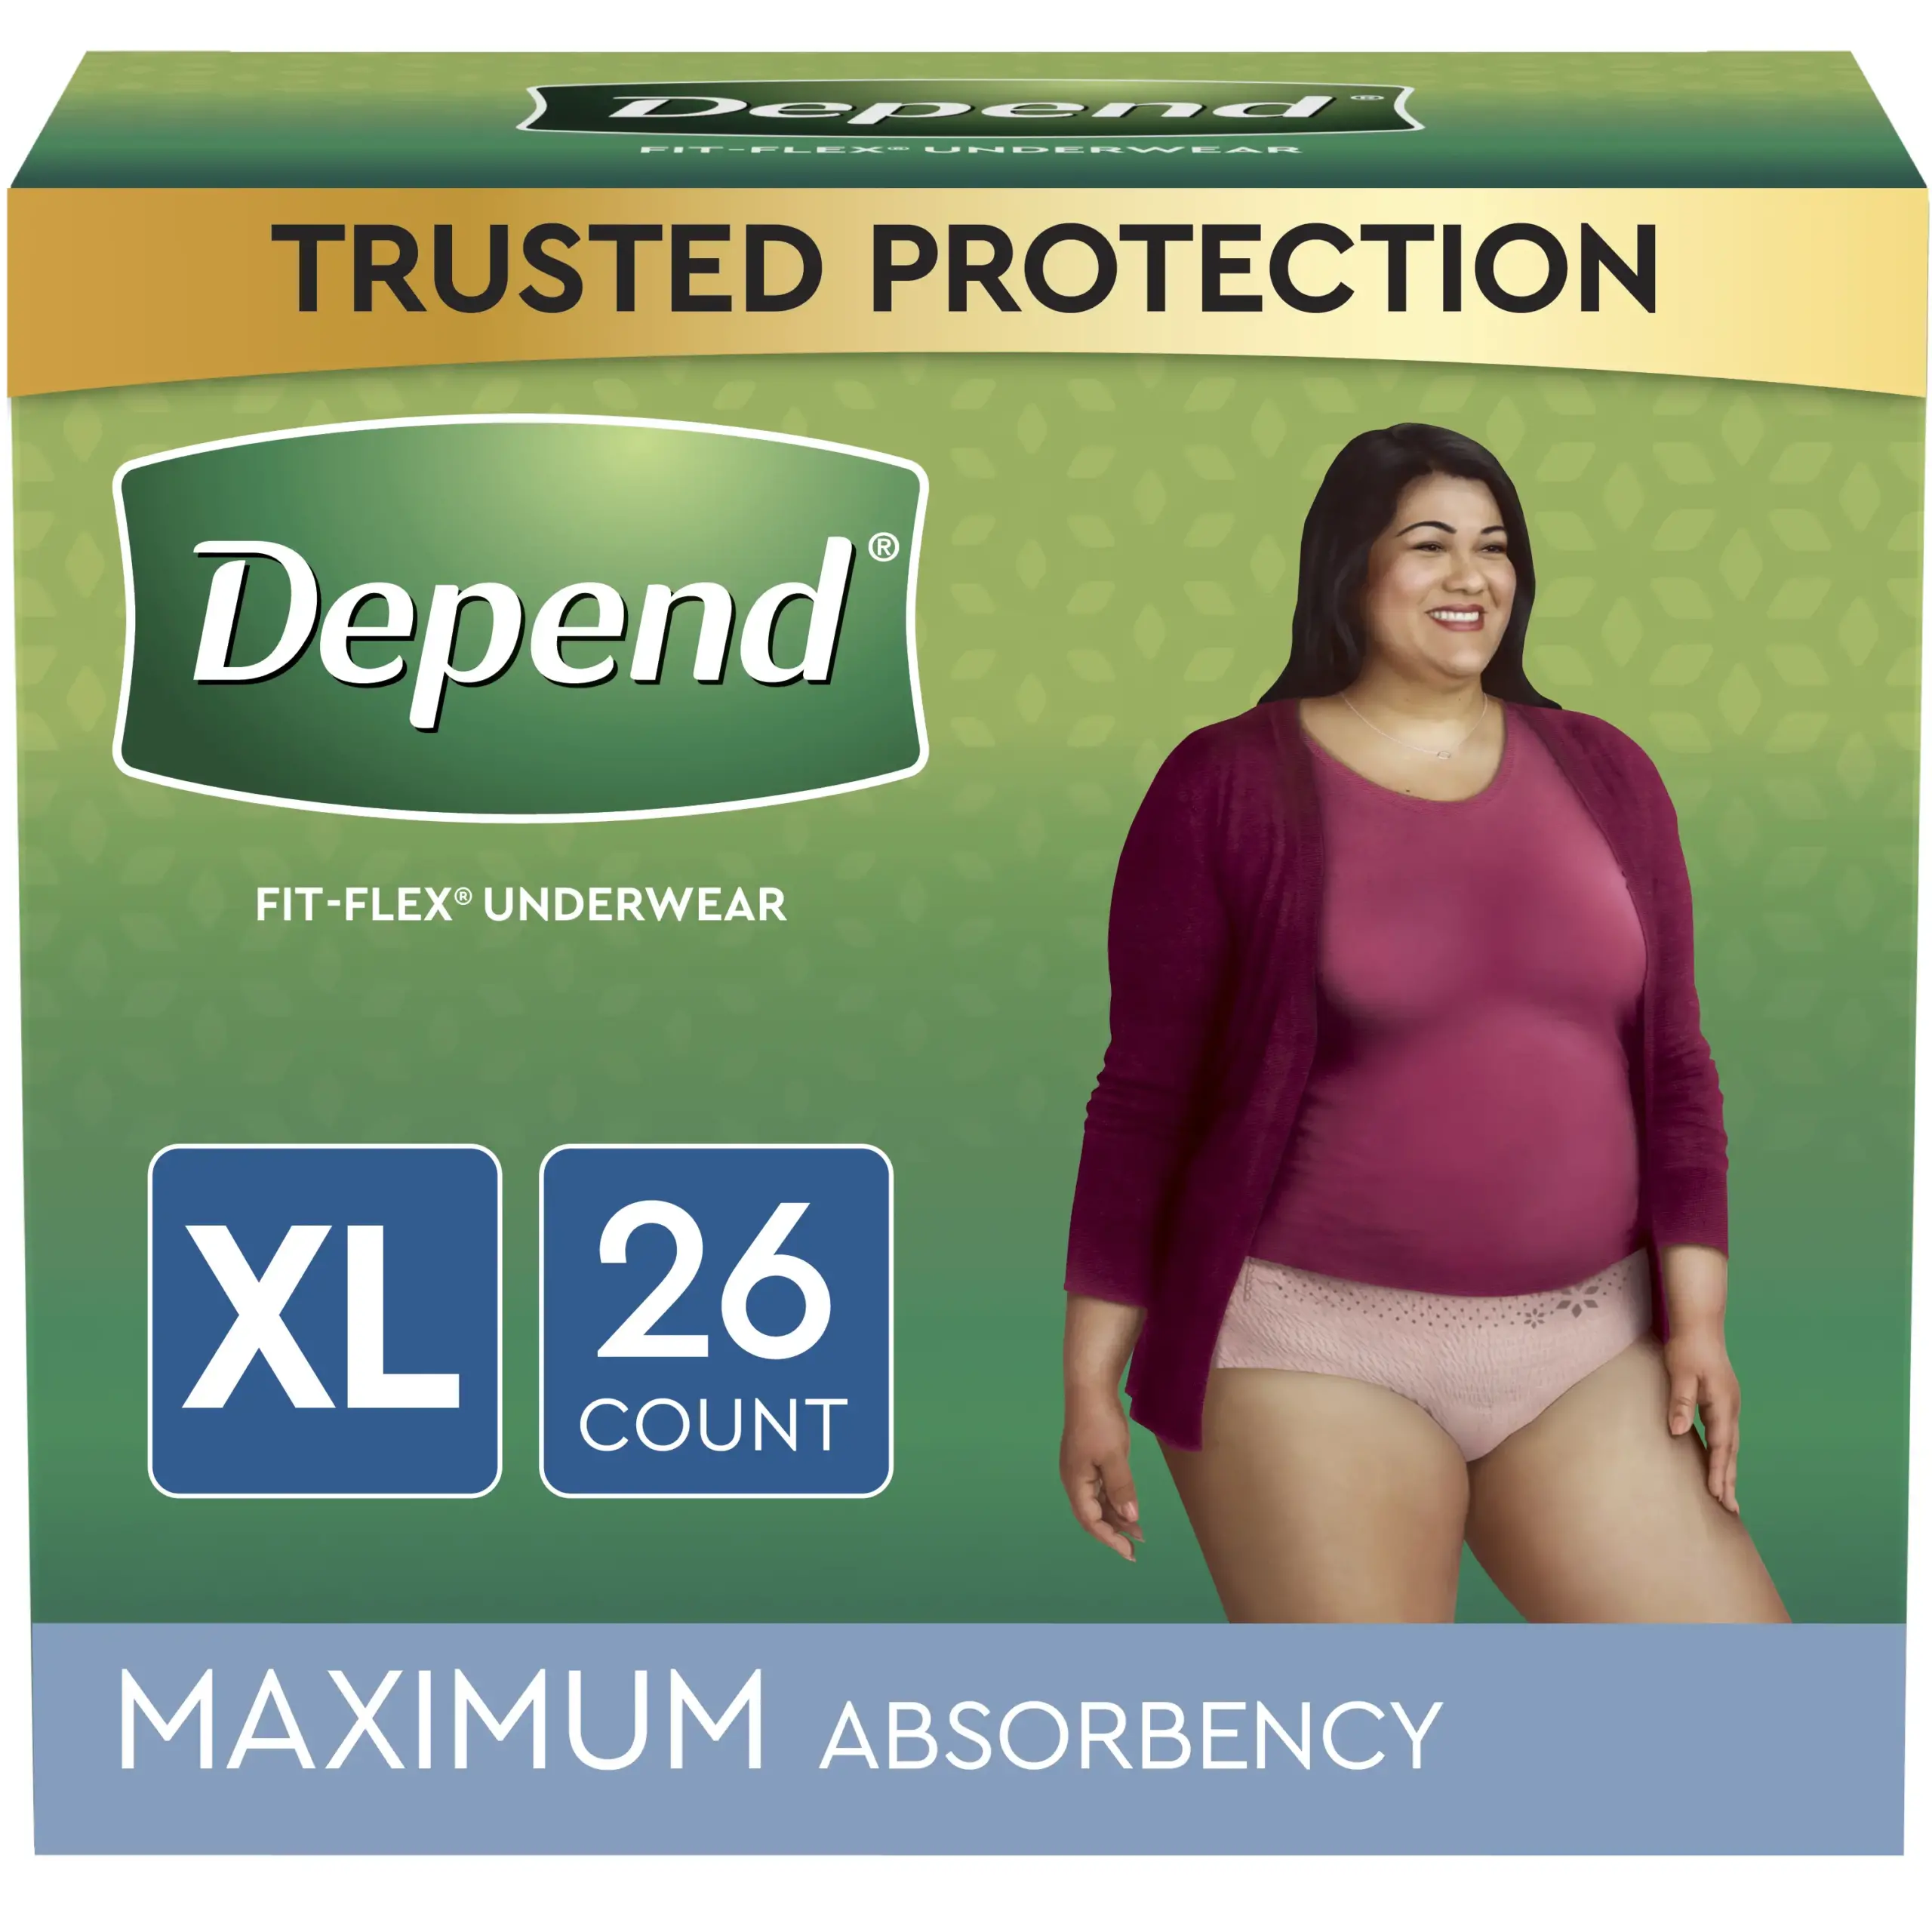 Depend FIT-FLEX Incontinence Underwear for Women, Maximum Absorbency, XL, Blush, 26 Count, Replaces Item 6913406